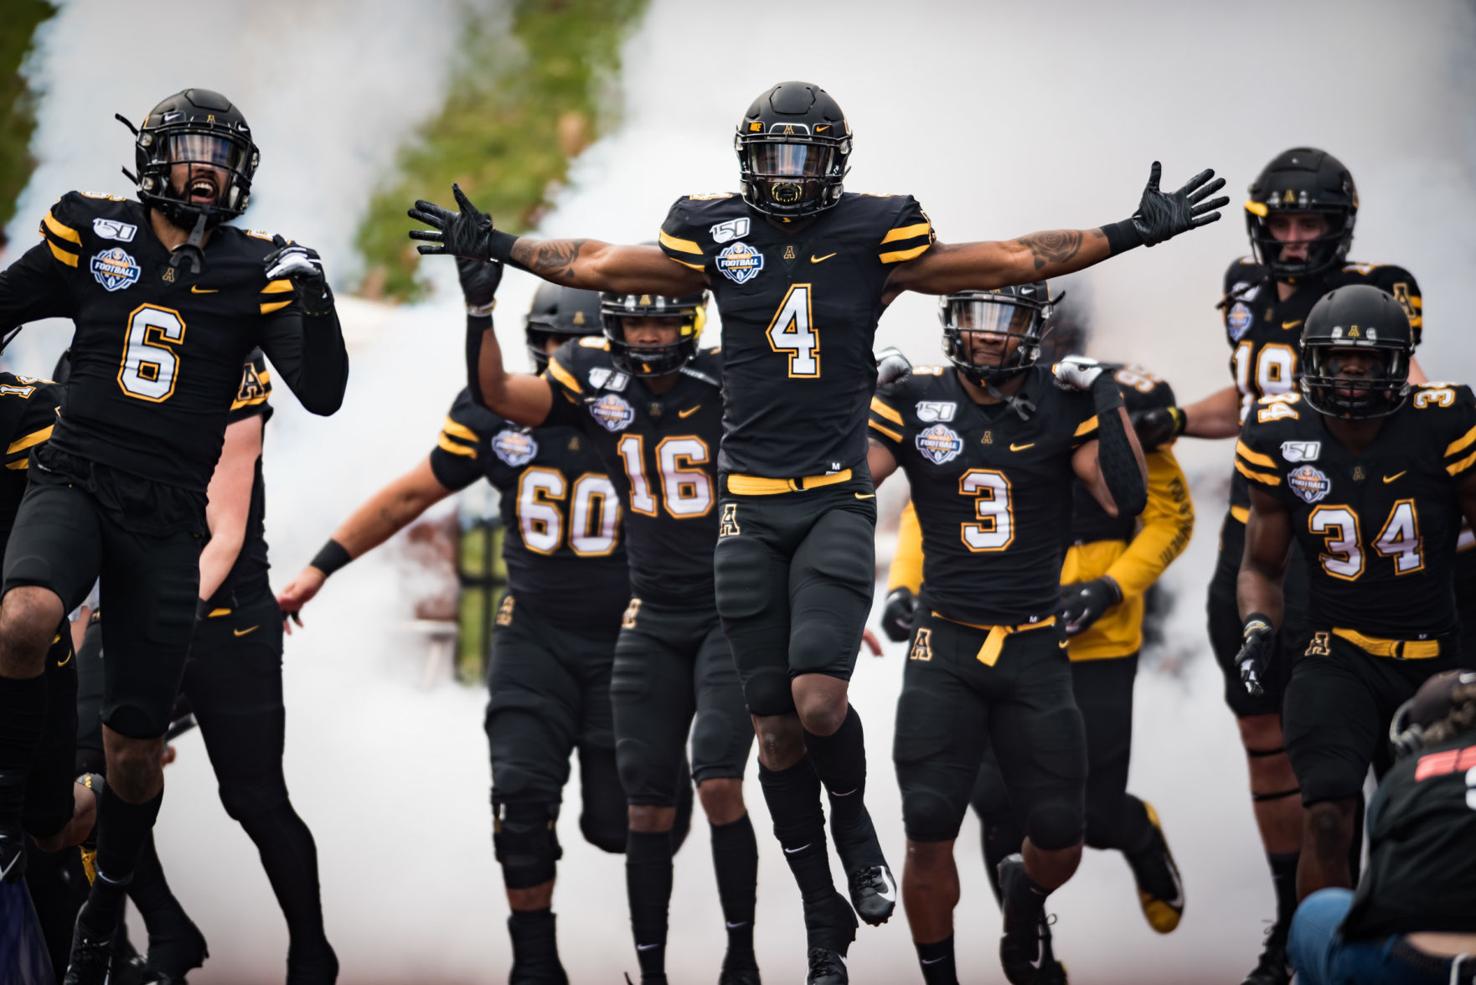 App State football returns to practice three days after COVID19